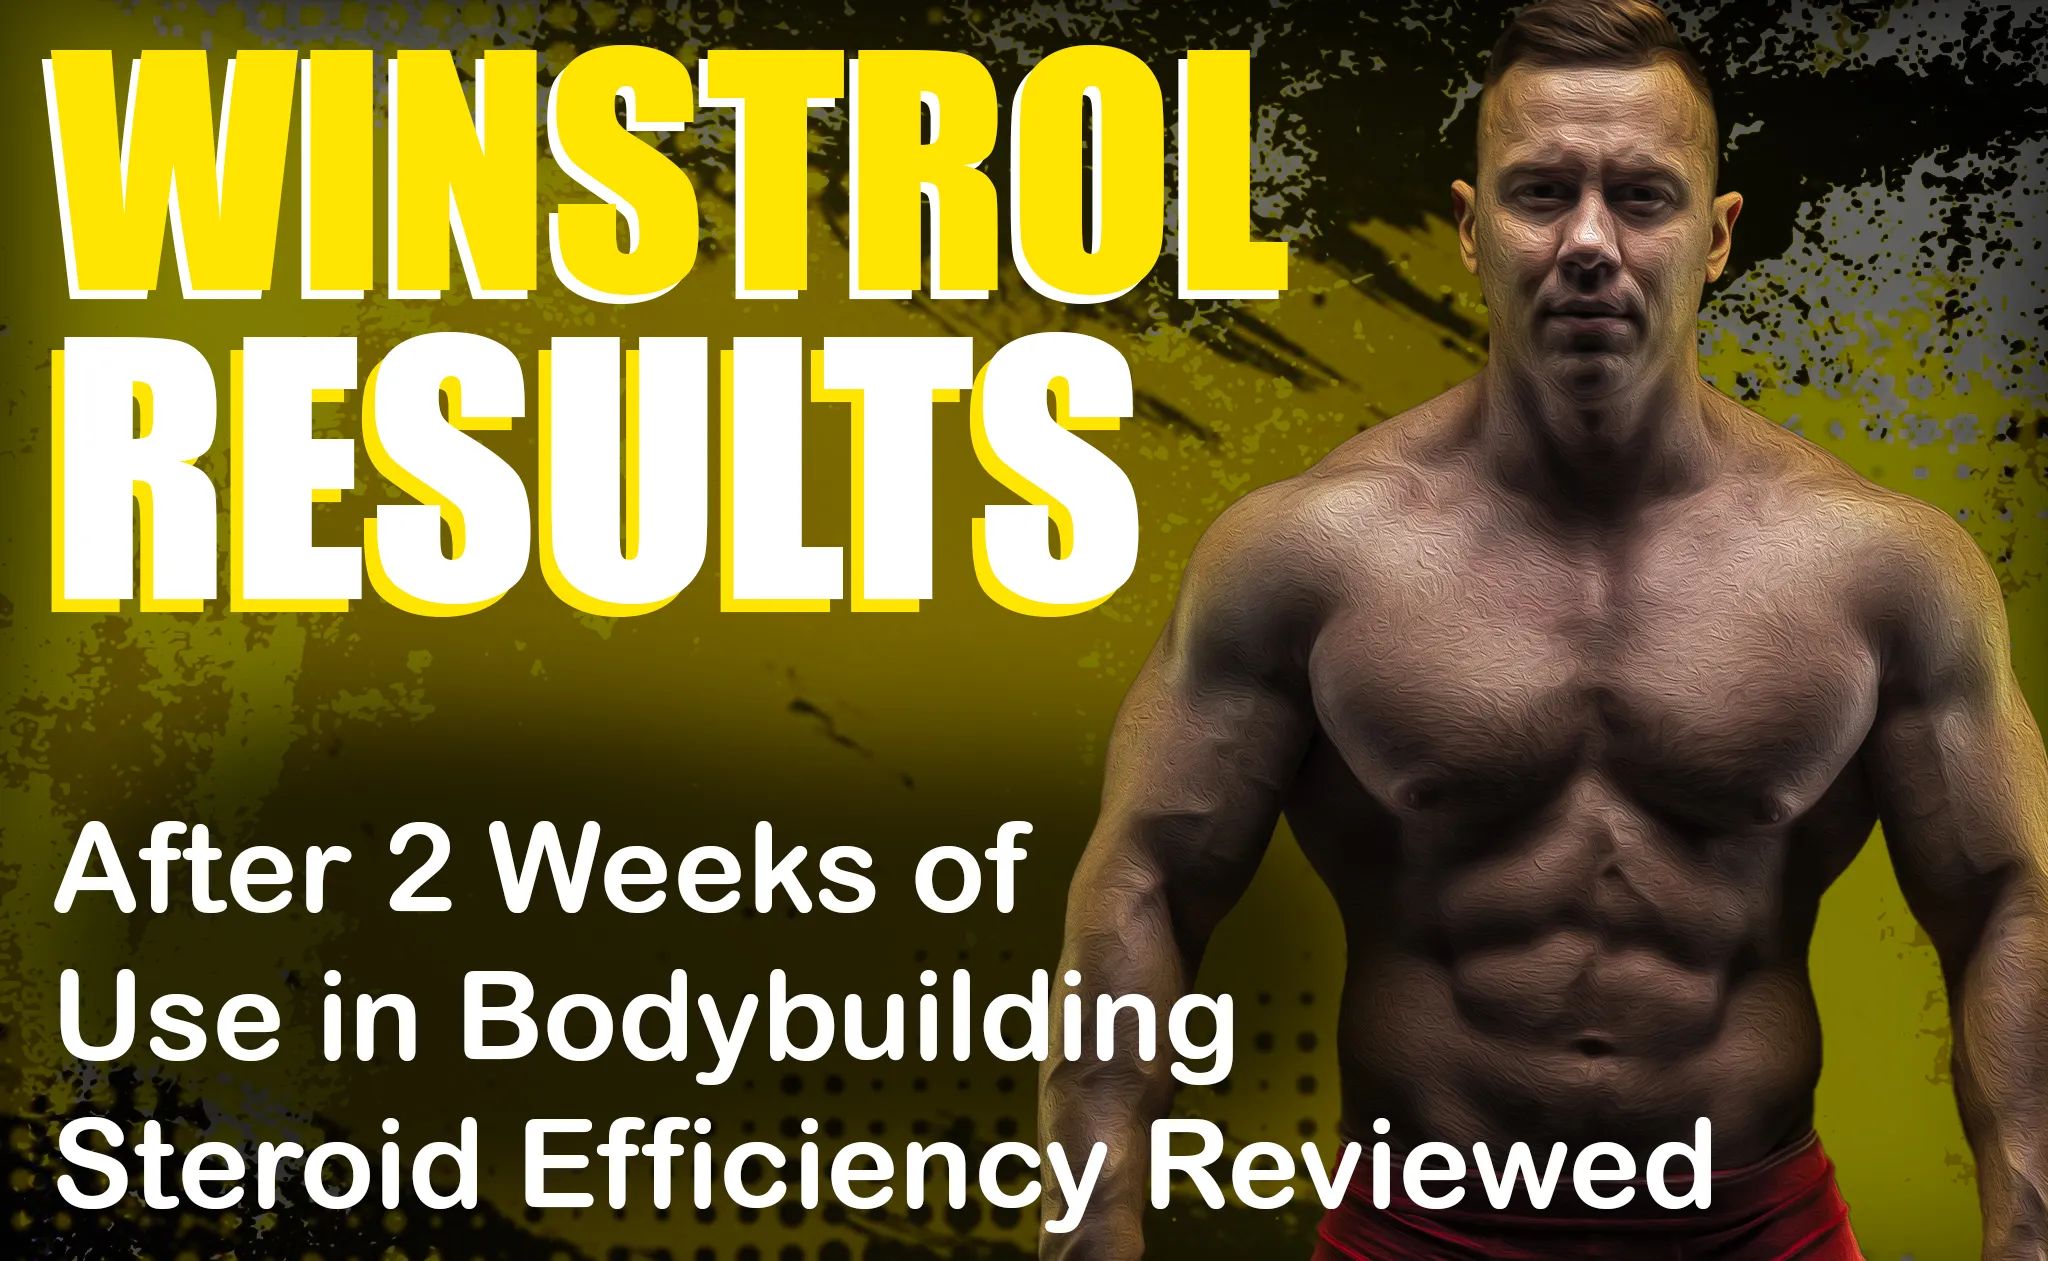 Winstrol Results After 2 Weeks of Use in Bodybuilding – Steroid Efficiency Reviewed